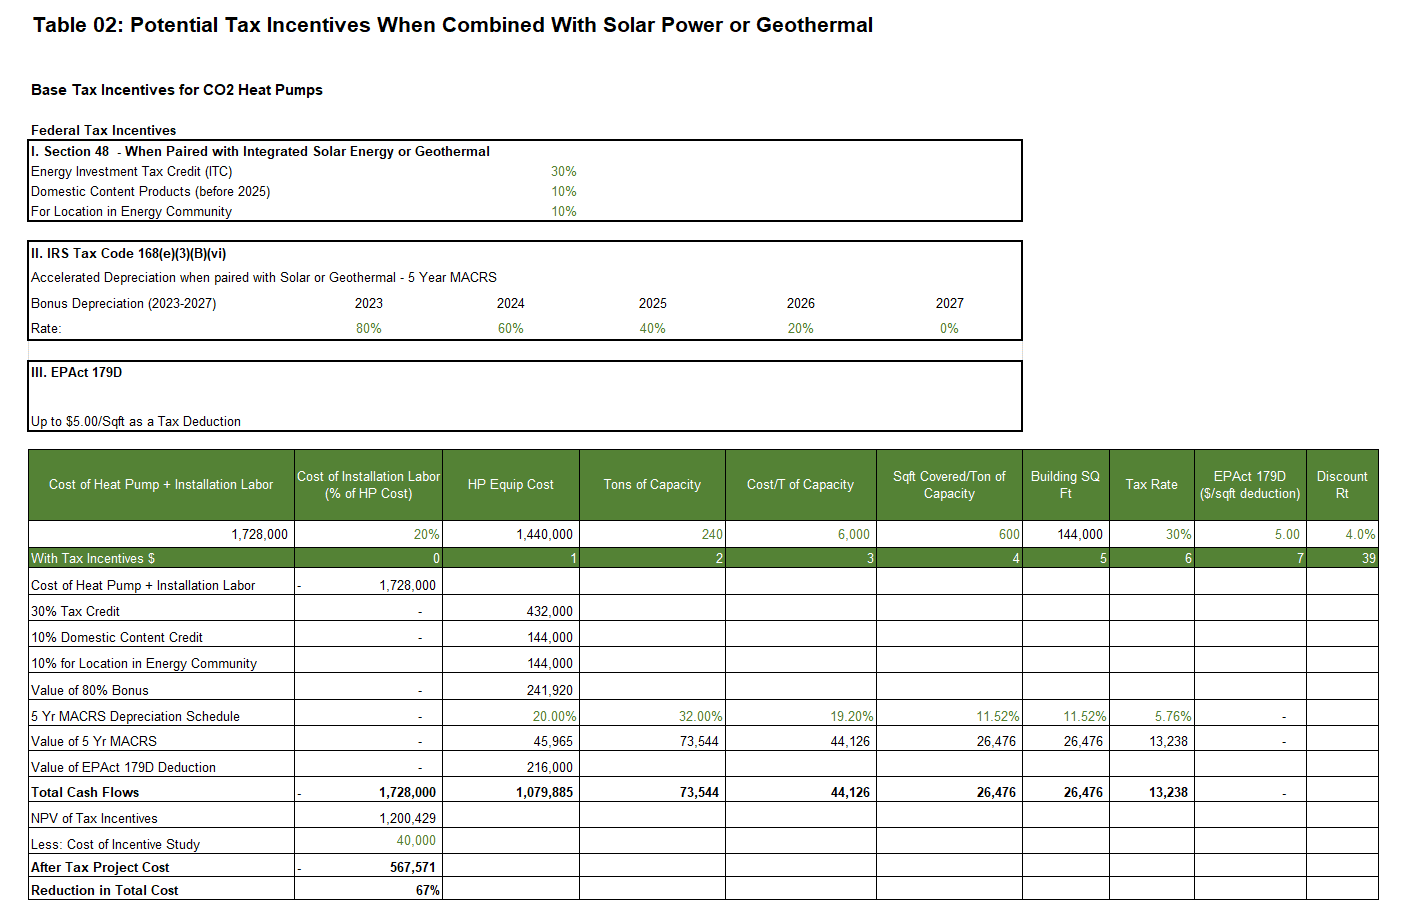 Table 02 Potential Tax Incentives when combined with solar power or geothermal